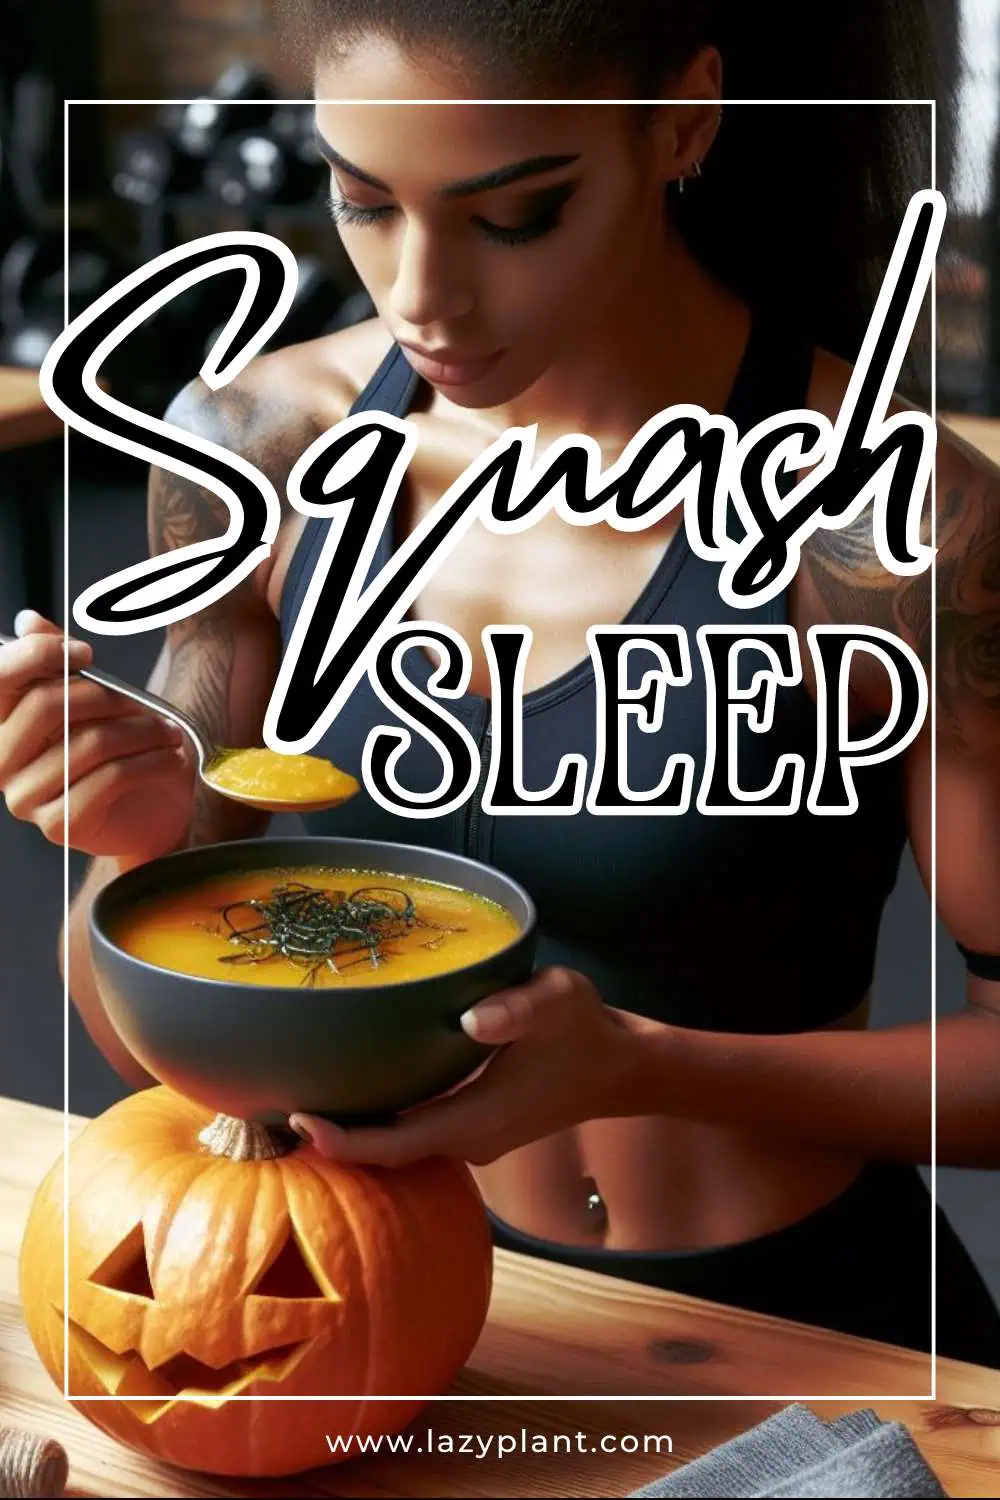 Squash at Dinner supports a good night's Sleep